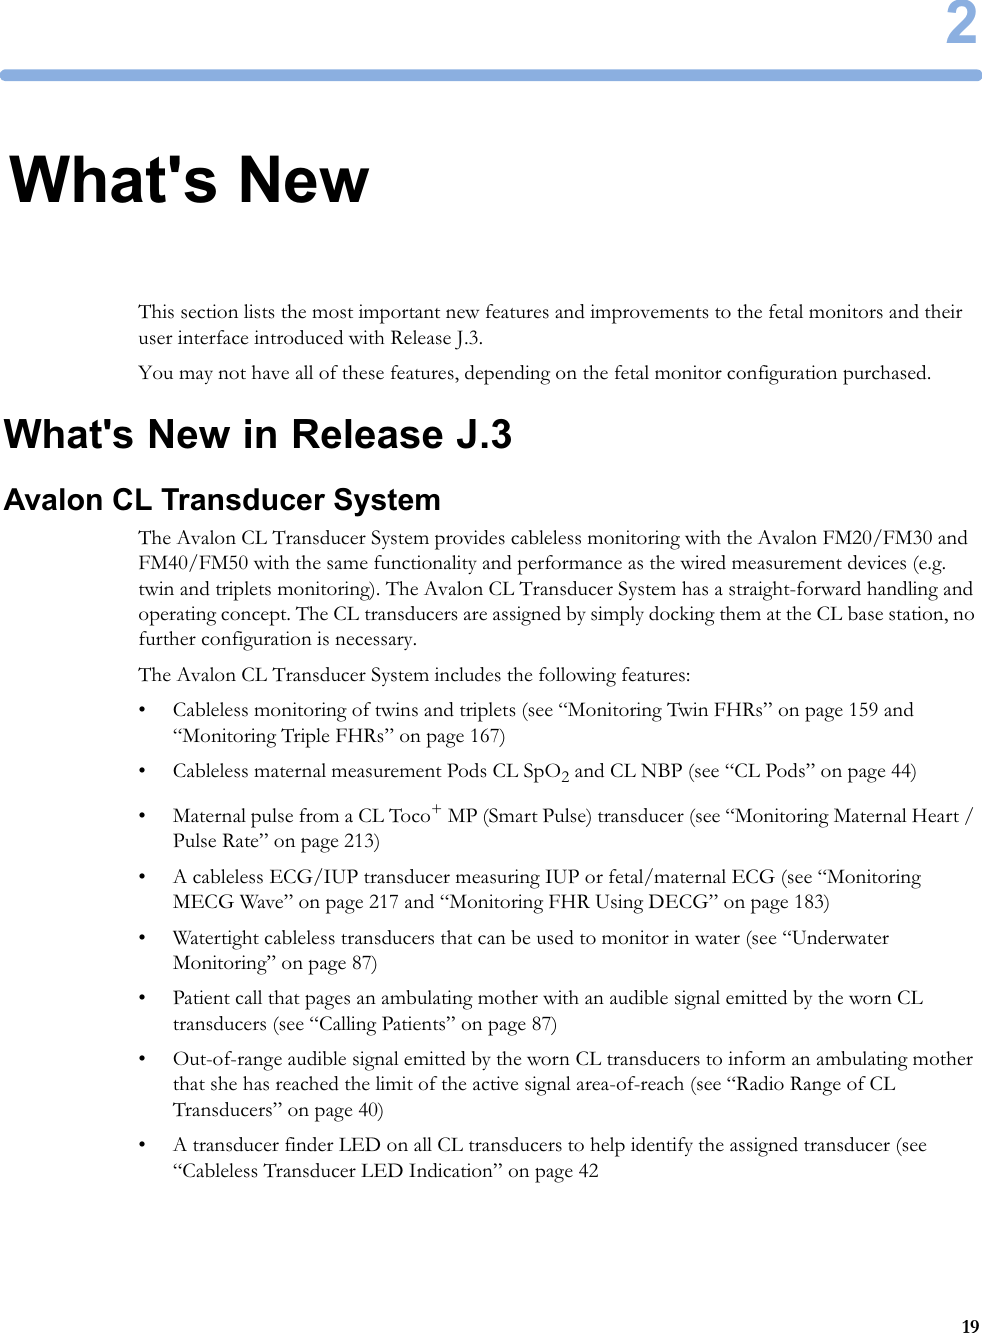 2192What&apos;s NewThis section lists the most important new features and improvements to the fetal monitors and their user interface introduced with Release J.3.You may not have all of these features, depending on the fetal monitor configuration purchased.What&apos;s New in Release J.3Avalon CL Transducer SystemThe Avalon CL Transducer System provides cableless monitoring with the Avalon FM20/FM30 and FM40/FM50 with the same functionality and performance as the wired measurement devices (e.g. twin and triplets monitoring). The Avalon CL Transducer System has a straight-forward handling and operating concept. The CL transducers are assigned by simply docking them at the CL base station, no further configuration is necessary.The Avalon CL Transducer System includes the following features:• Cableless monitoring of twins and triplets (see “Monitoring Twin FHRs” on page 159 and “Monitoring Triple FHRs” on page 167)• Cableless maternal measurement Pods CL SpO2 and CL NBP (see “CL Pods” on page 44)• Maternal pulse from a CL Toco+ MP (Smart Pulse) transducer (see “Monitoring Maternal Heart / Pulse Rate” on page 213)• A cableless ECG/IUP transducer measuring IUP or fetal/maternal ECG (see “Monitoring MECG Wave” on page 217 and “Monitoring FHR Using DECG” on page 183)• Watertight cableless transducers that can be used to monitor in water (see “Underwater Monitoring” on page 87)• Patient call that pages an ambulating mother with an audible signal emitted by the worn CL transducers (see “Calling Patients” on page 87)• Out-of-range audible signal emitted by the worn CL transducers to inform an ambulating mother that she has reached the limit of the active signal area-of-reach (see “Radio Range of CL Transducers” on page 40)• A transducer finder LED on all CL transducers to help identify the assigned transducer (see “Cableless Transducer LED Indication” on page 42